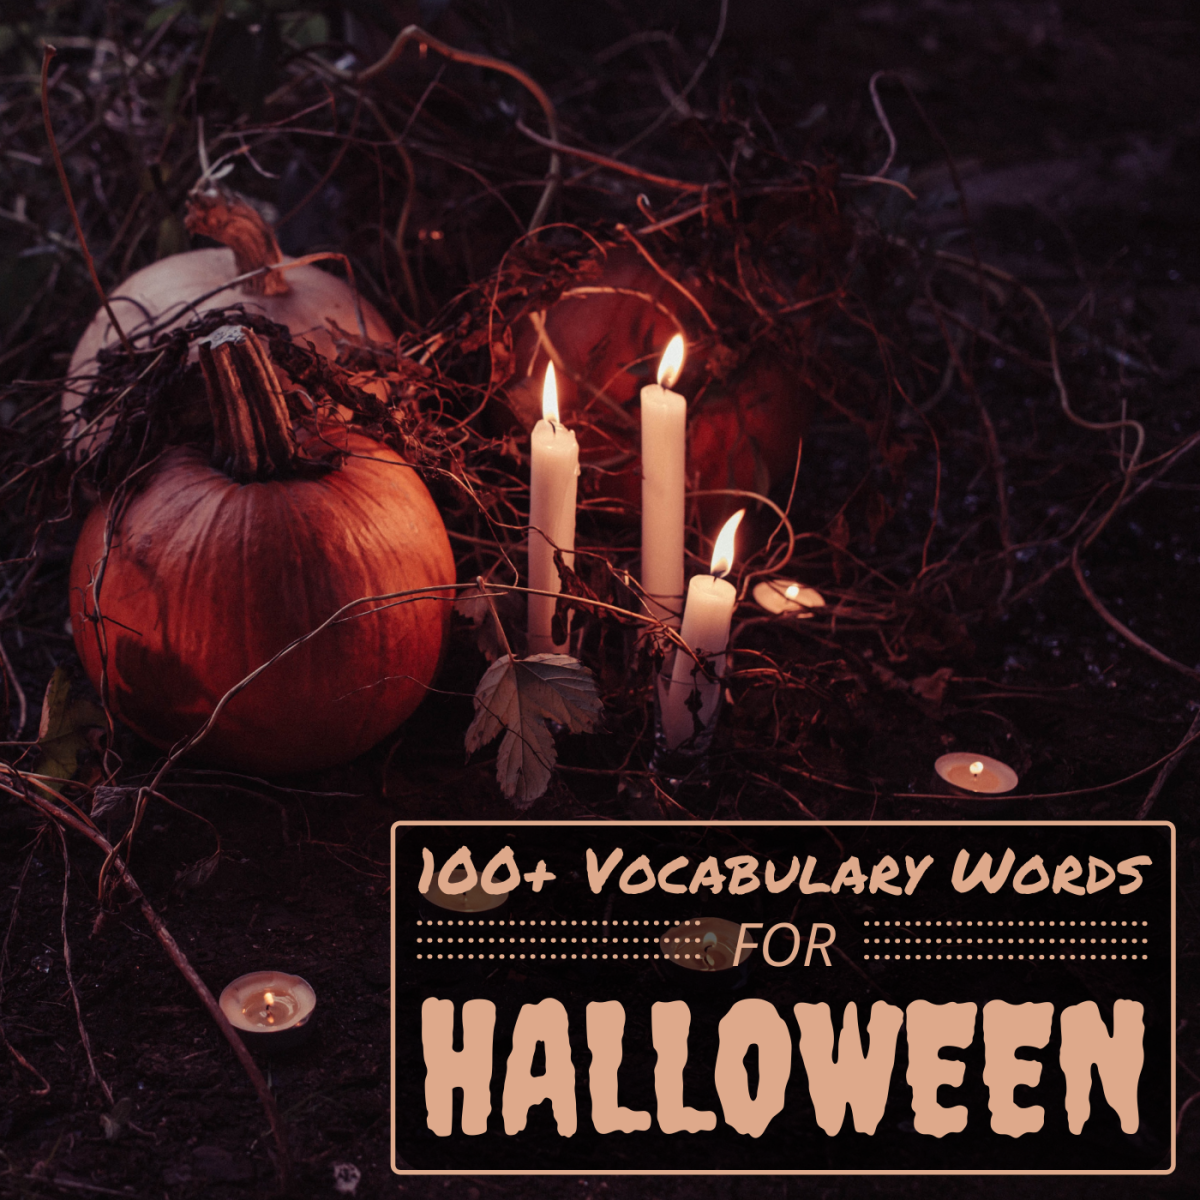 Halloween is a great time to combine fun with education—here are some spooky vocabulary words you can use in your celebrations.